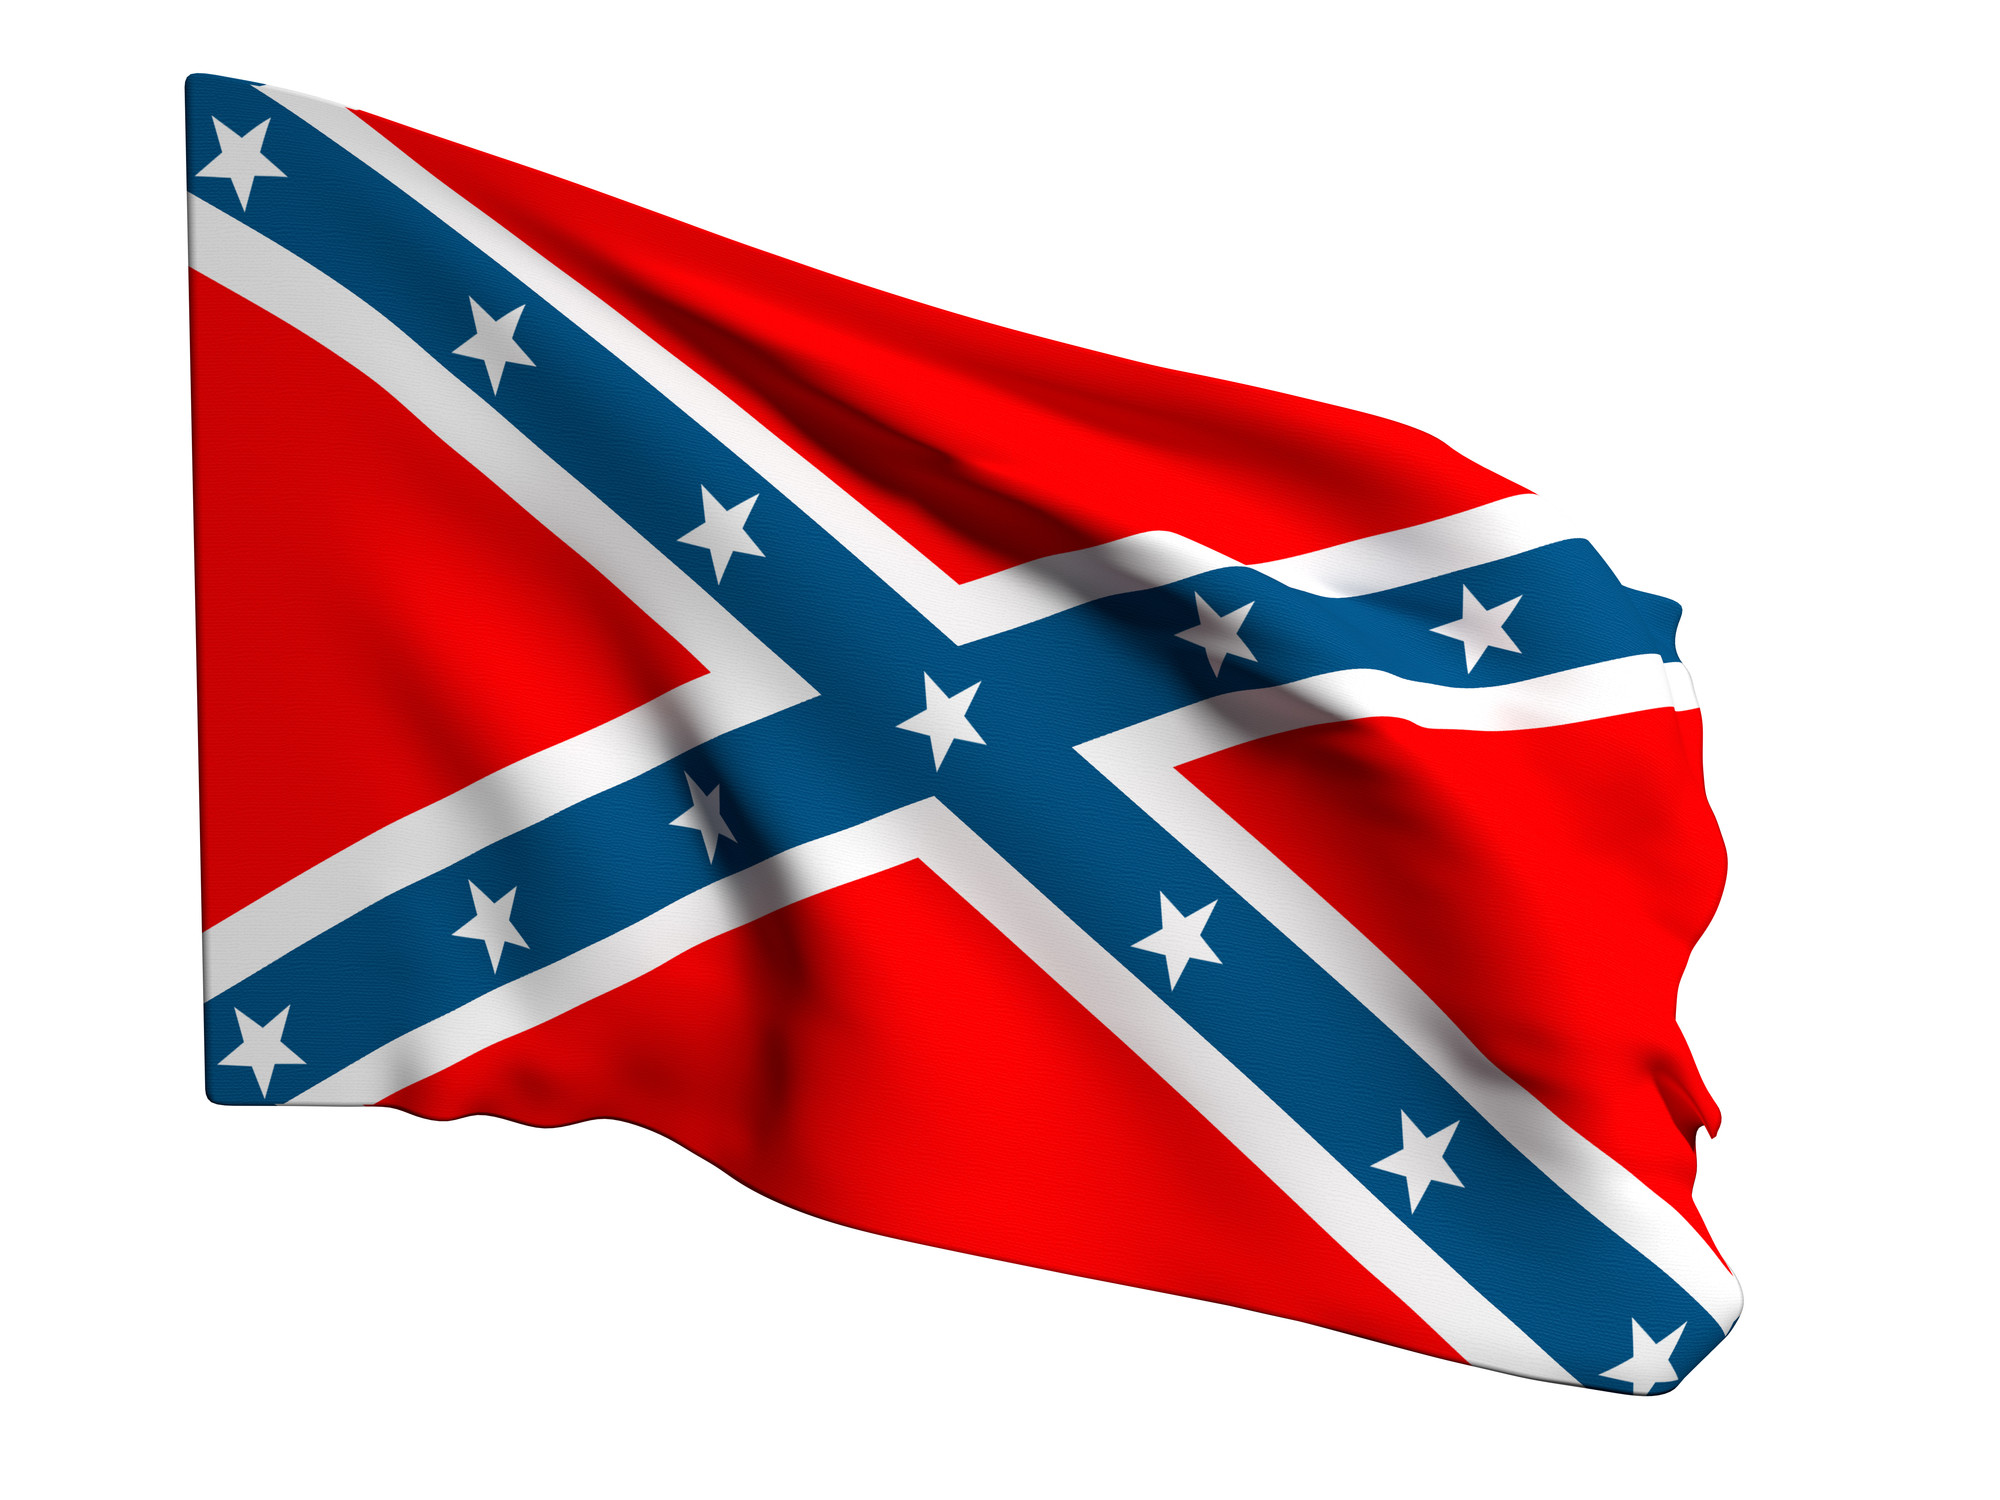 2000x1500 ... 15 confederate flag desktop wallpapers images and pictures ...